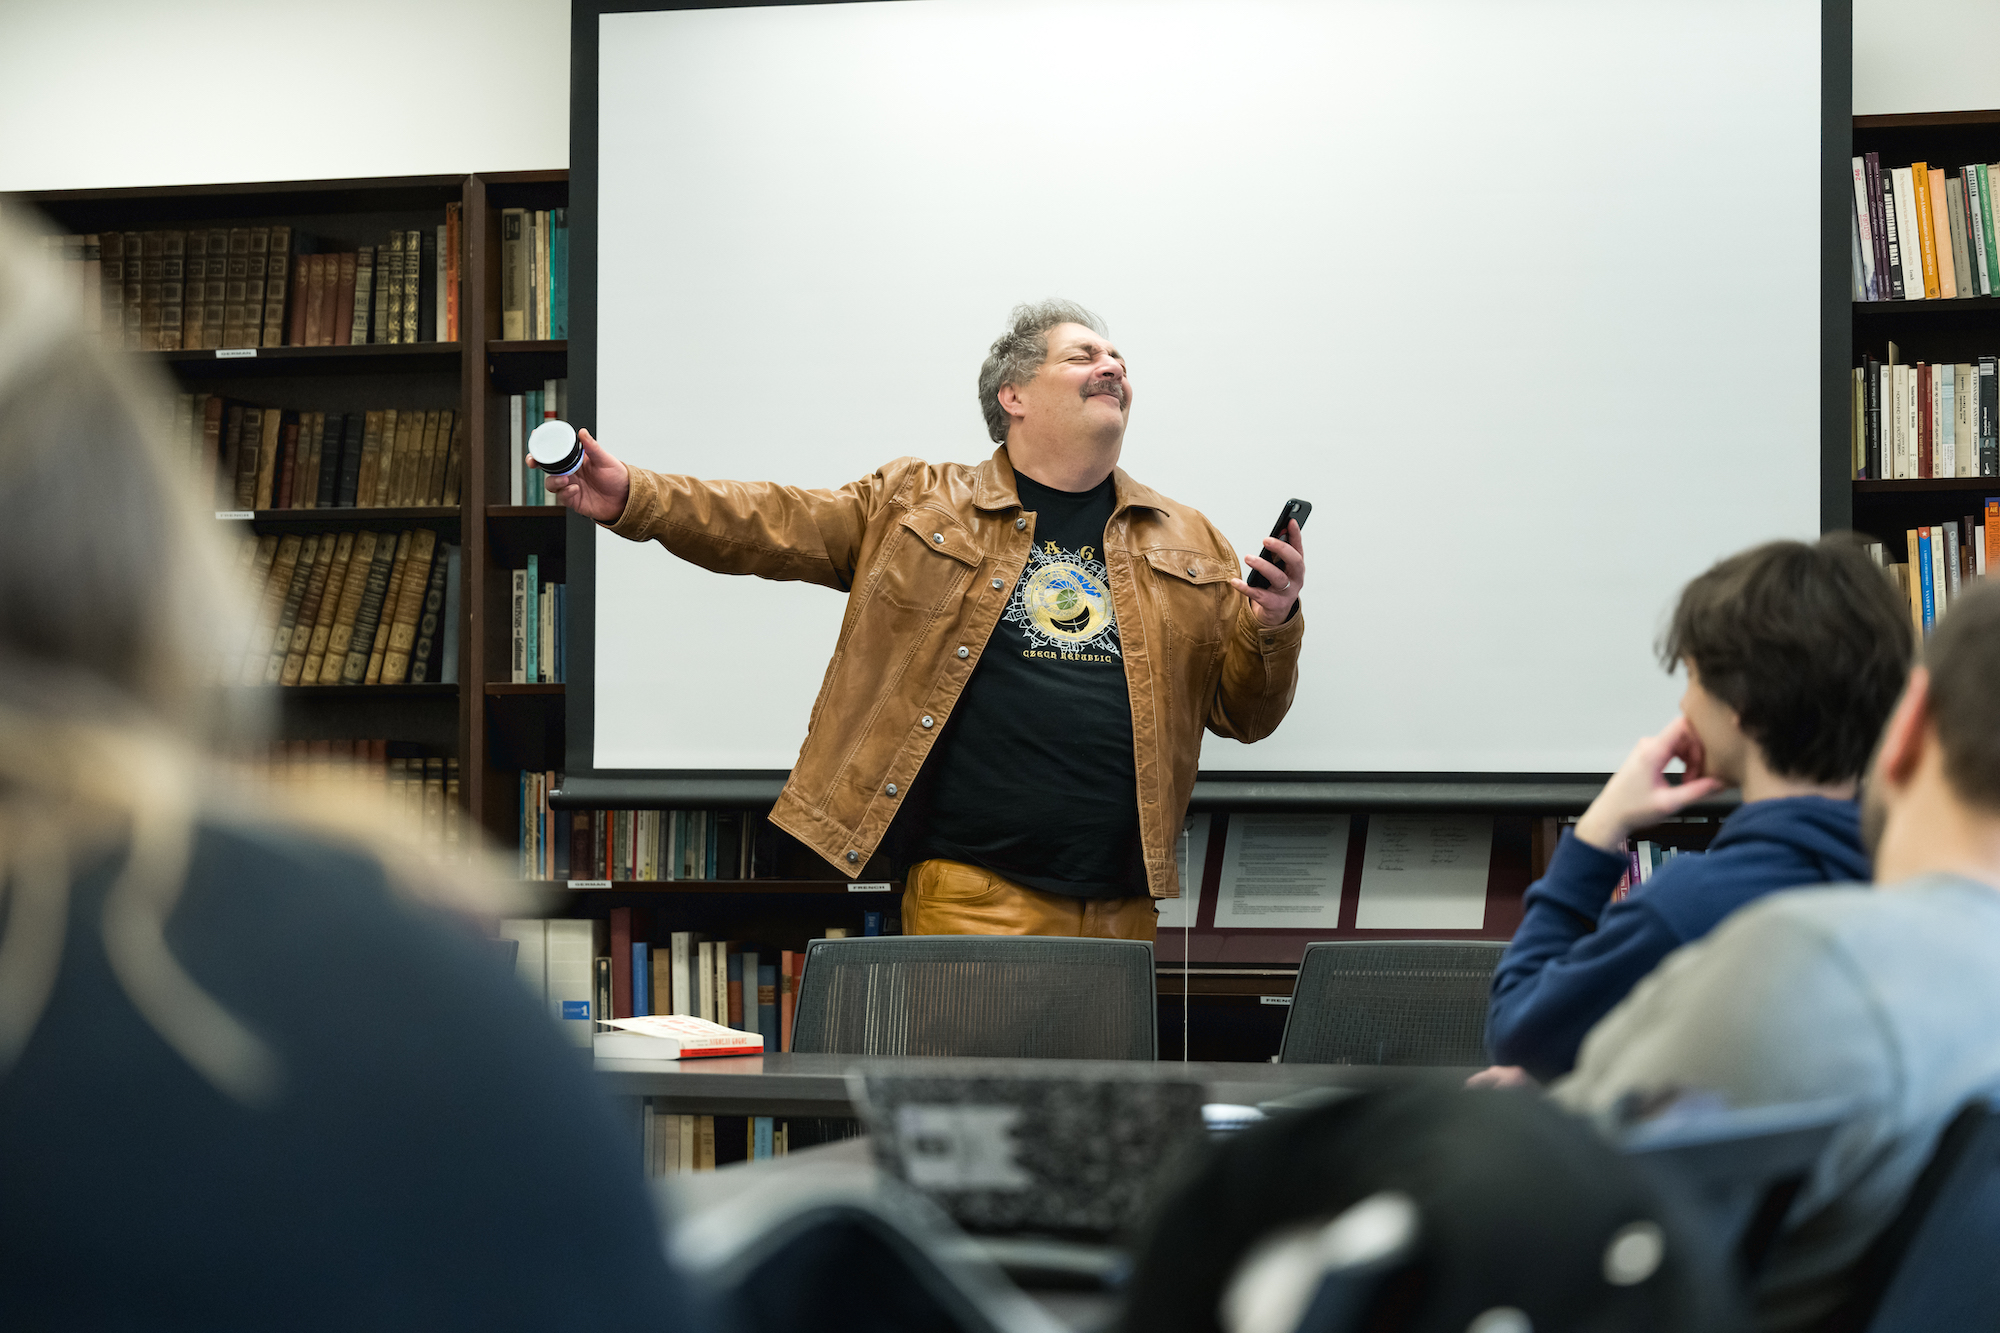 Professor holds a cell phone and a small speaker out in the direction of his students